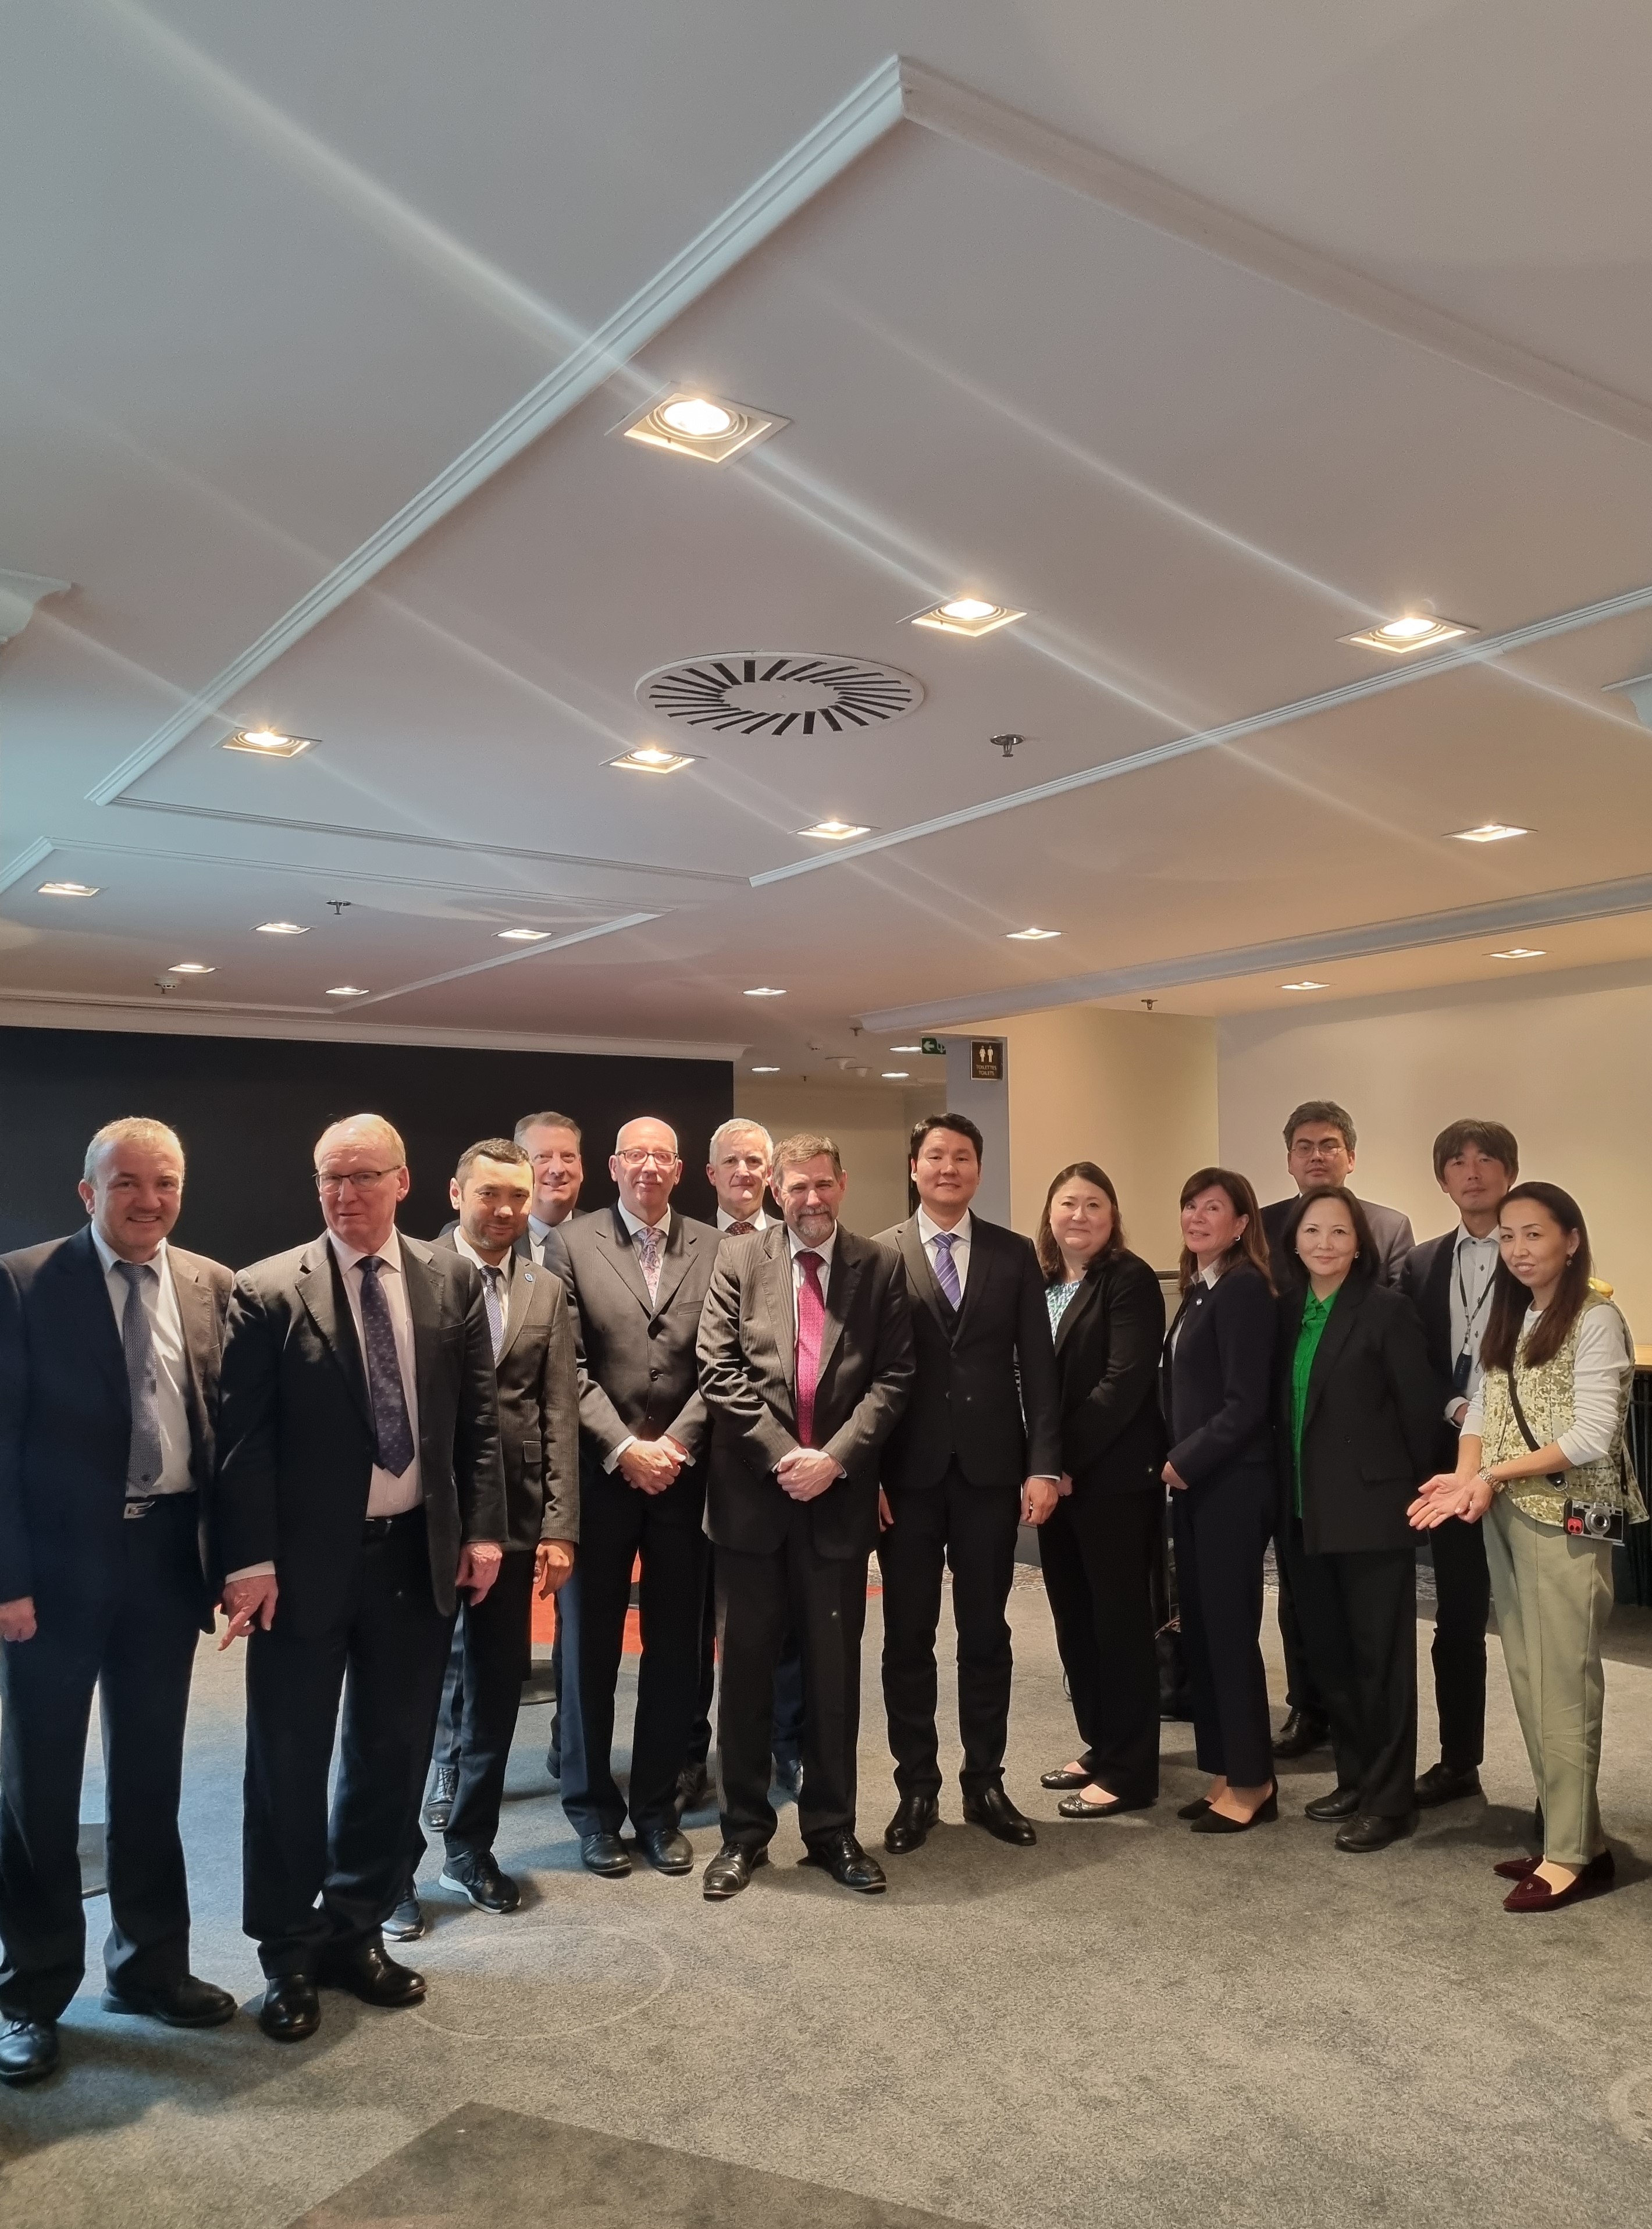 ISTC conducted its annual Working Group Meeting in Brussels, Belgium